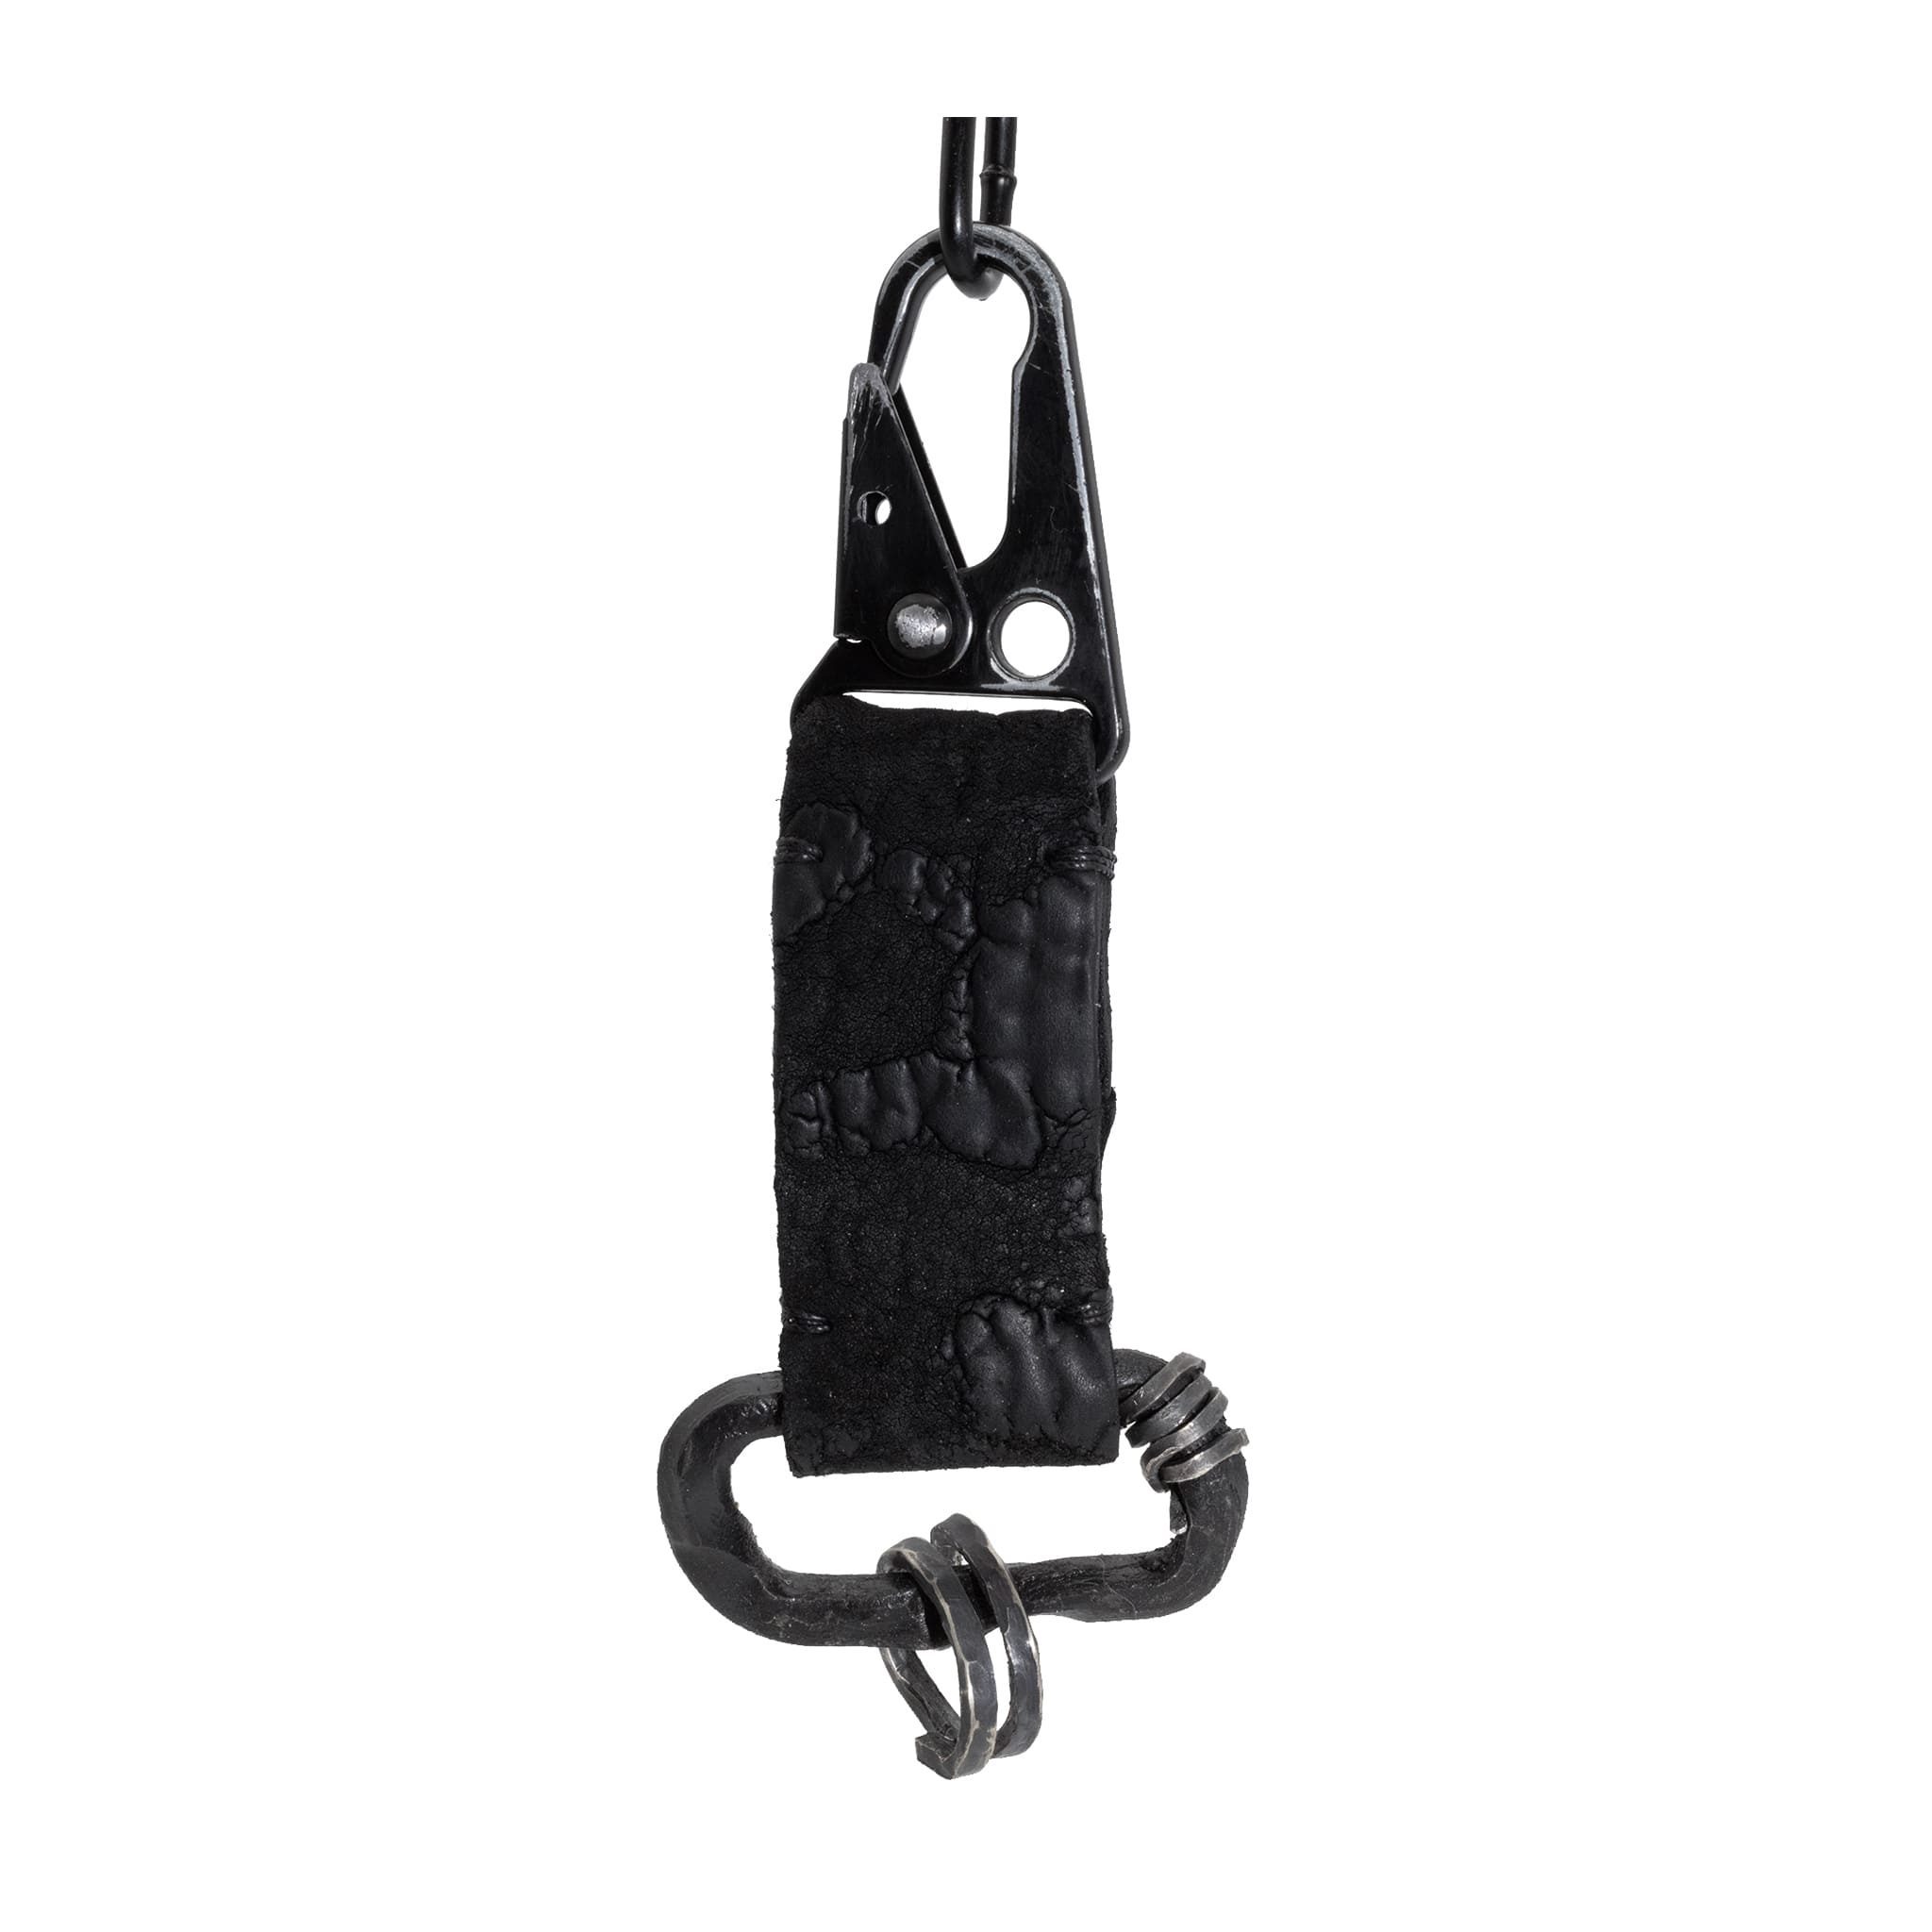 hand stitched black reverse horse culatta leather keychain with a military clip and hand forged iron hardware with .925 sterling silver details.